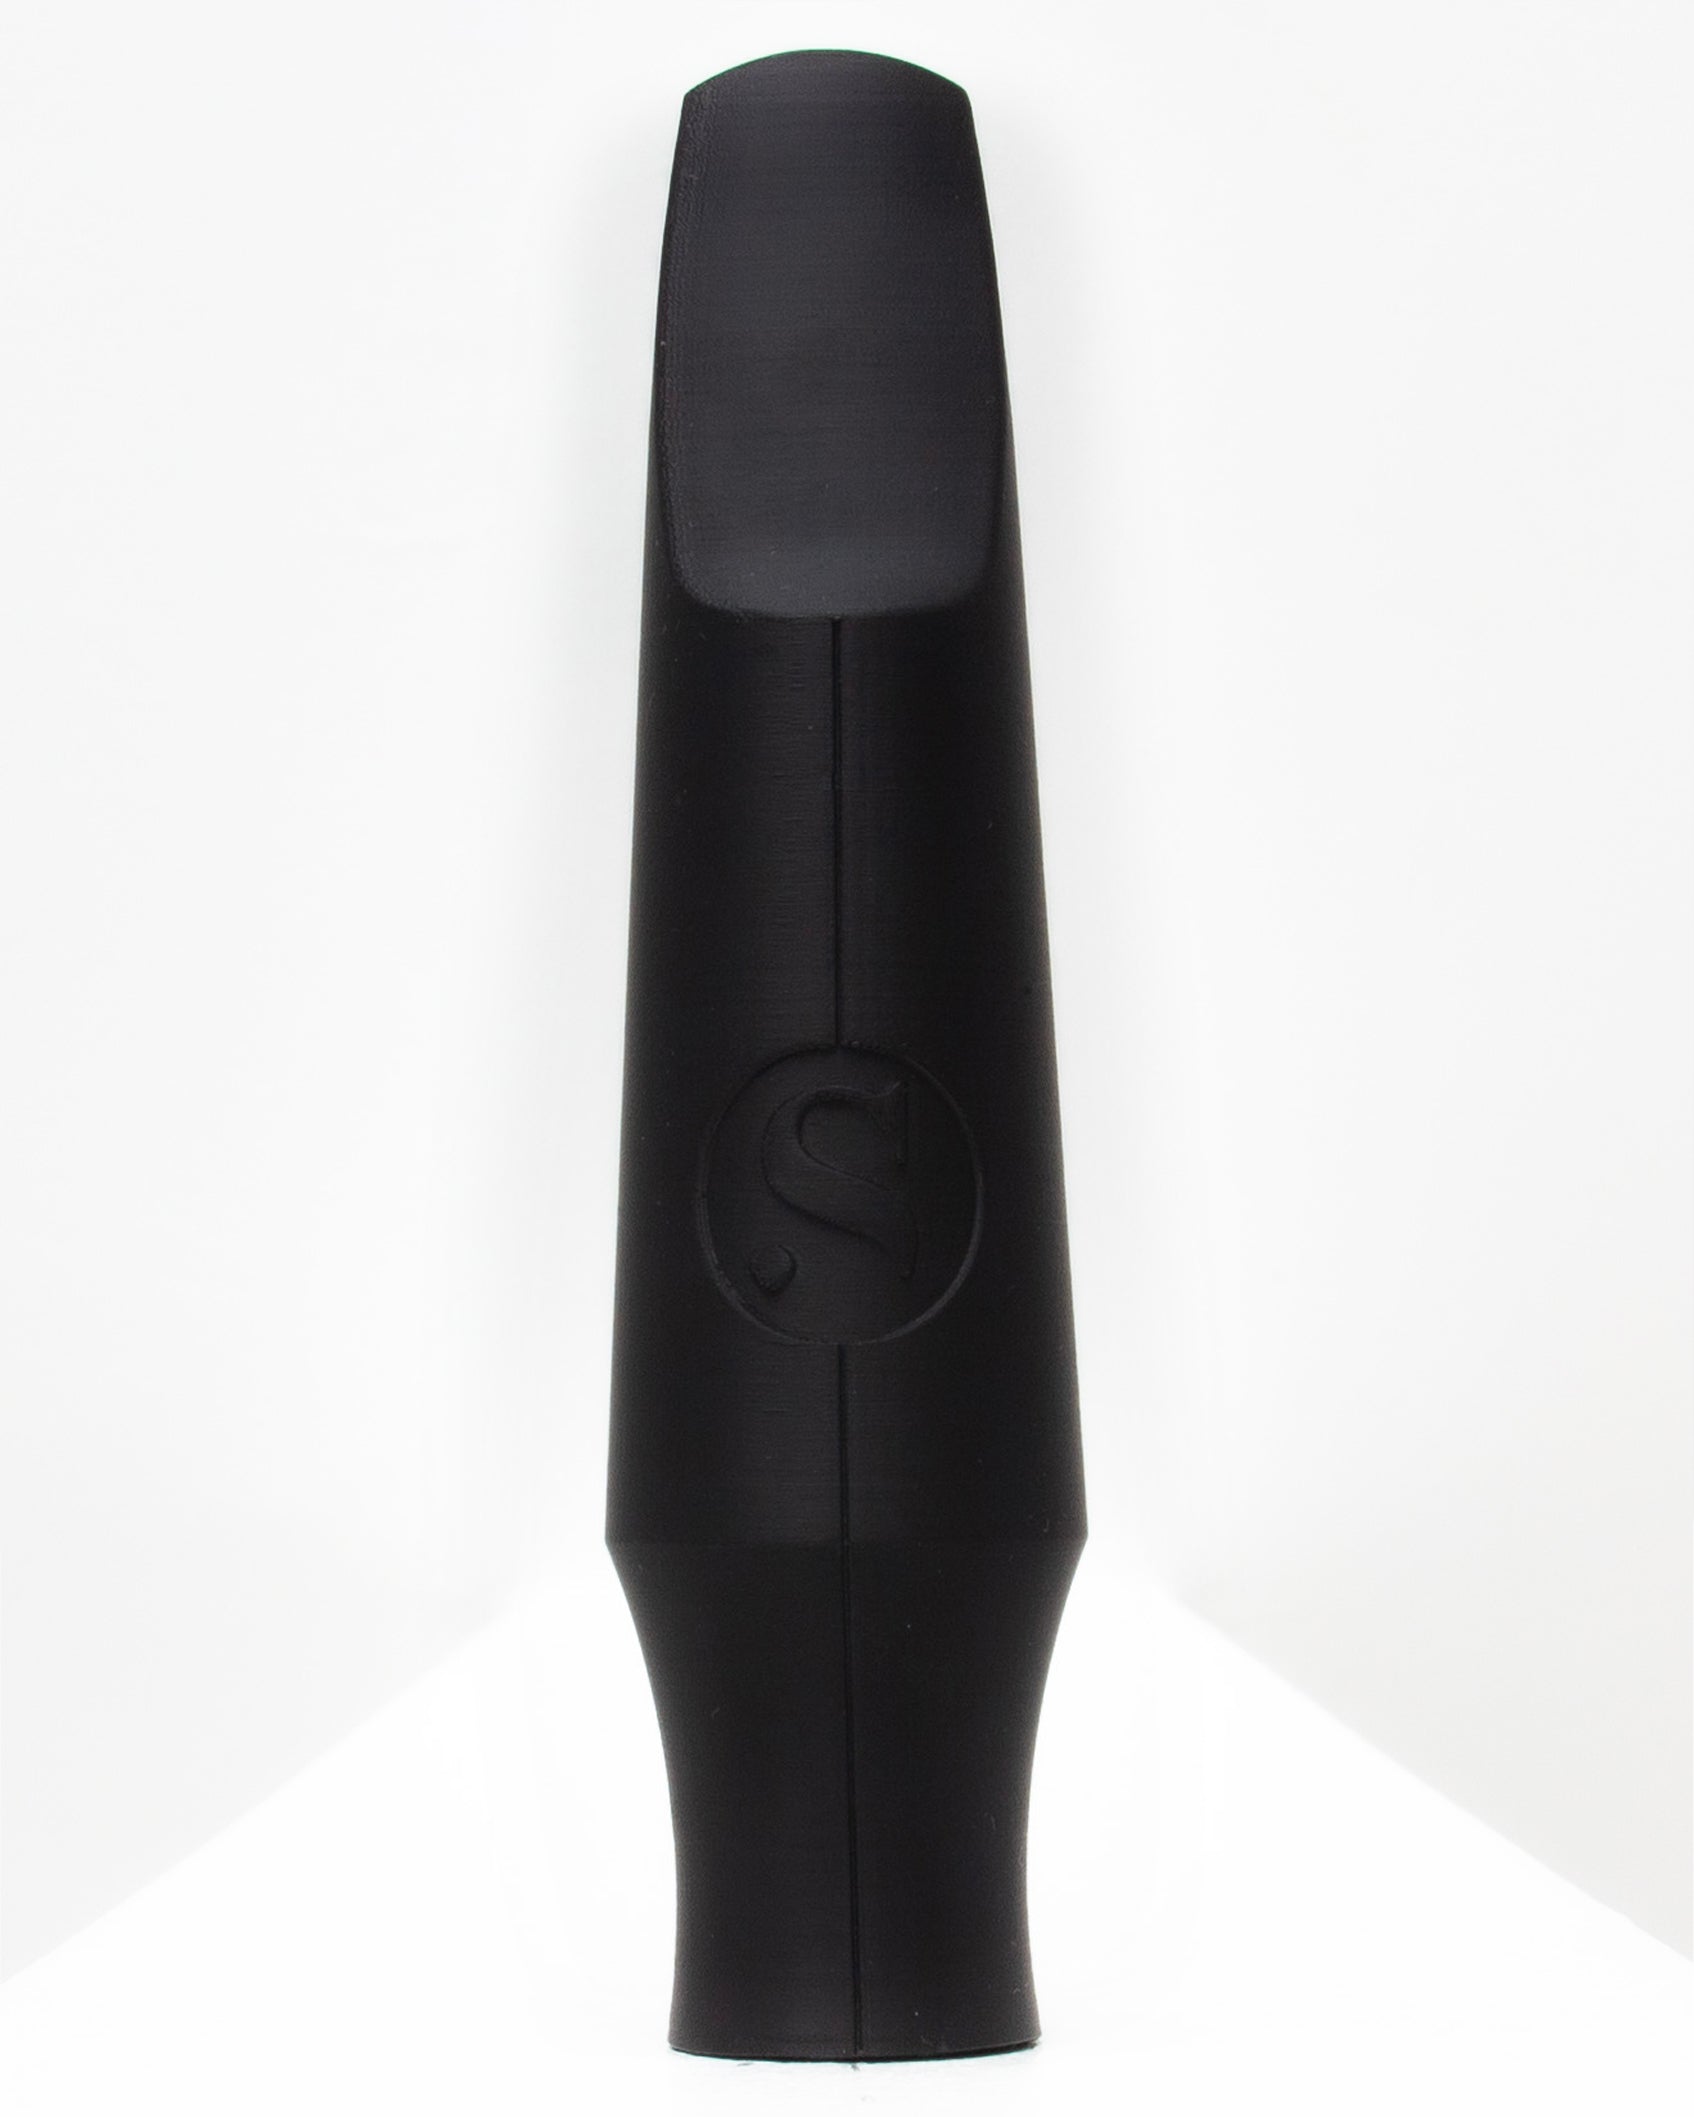 Baritone Signature Saxophone mouthpiece - Daro Behroozi by Syos - 10 / Pitch Black